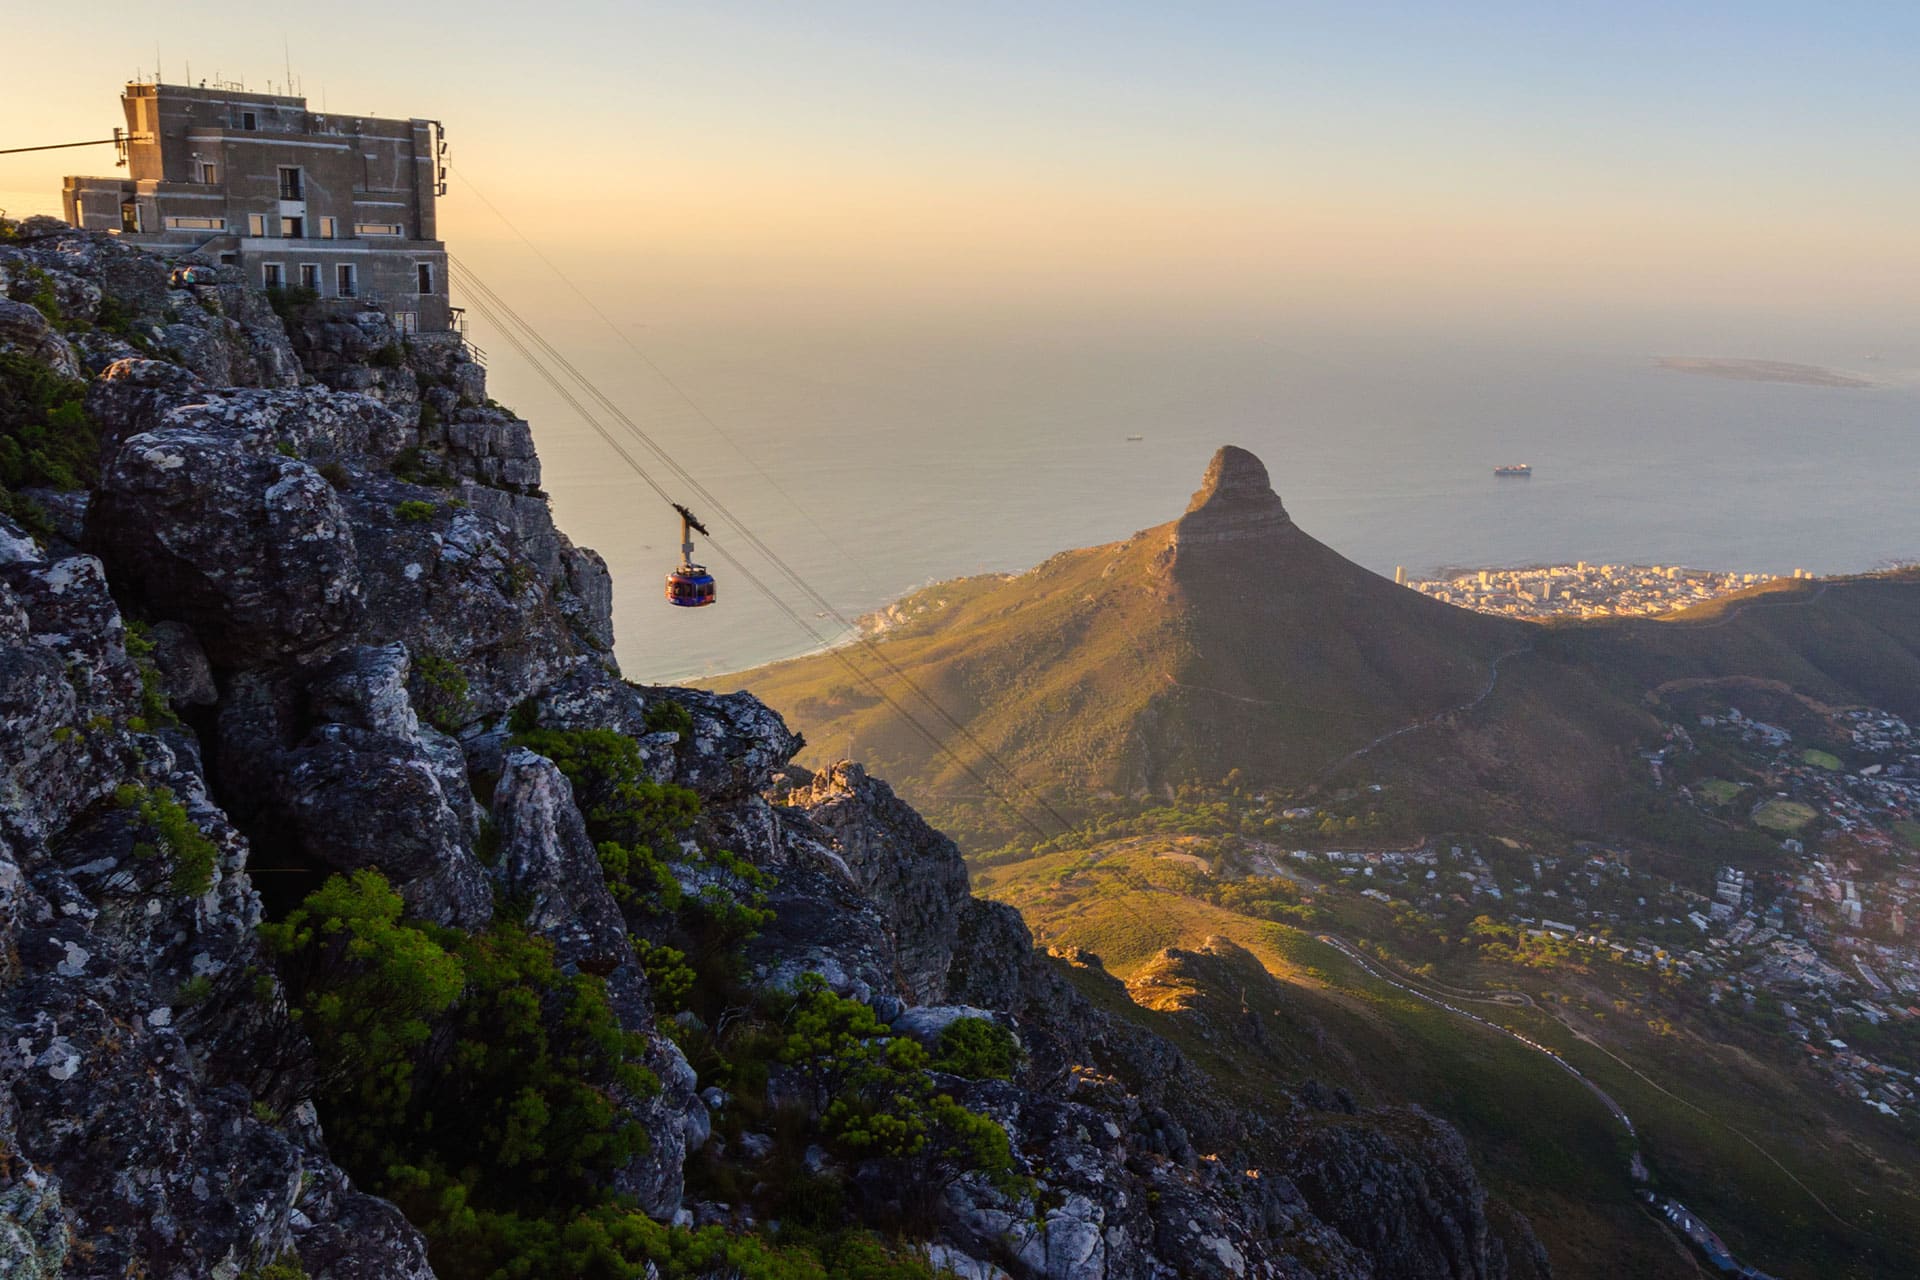 The Table Mountain Aerial Cableway with Lion’s Head in the background.